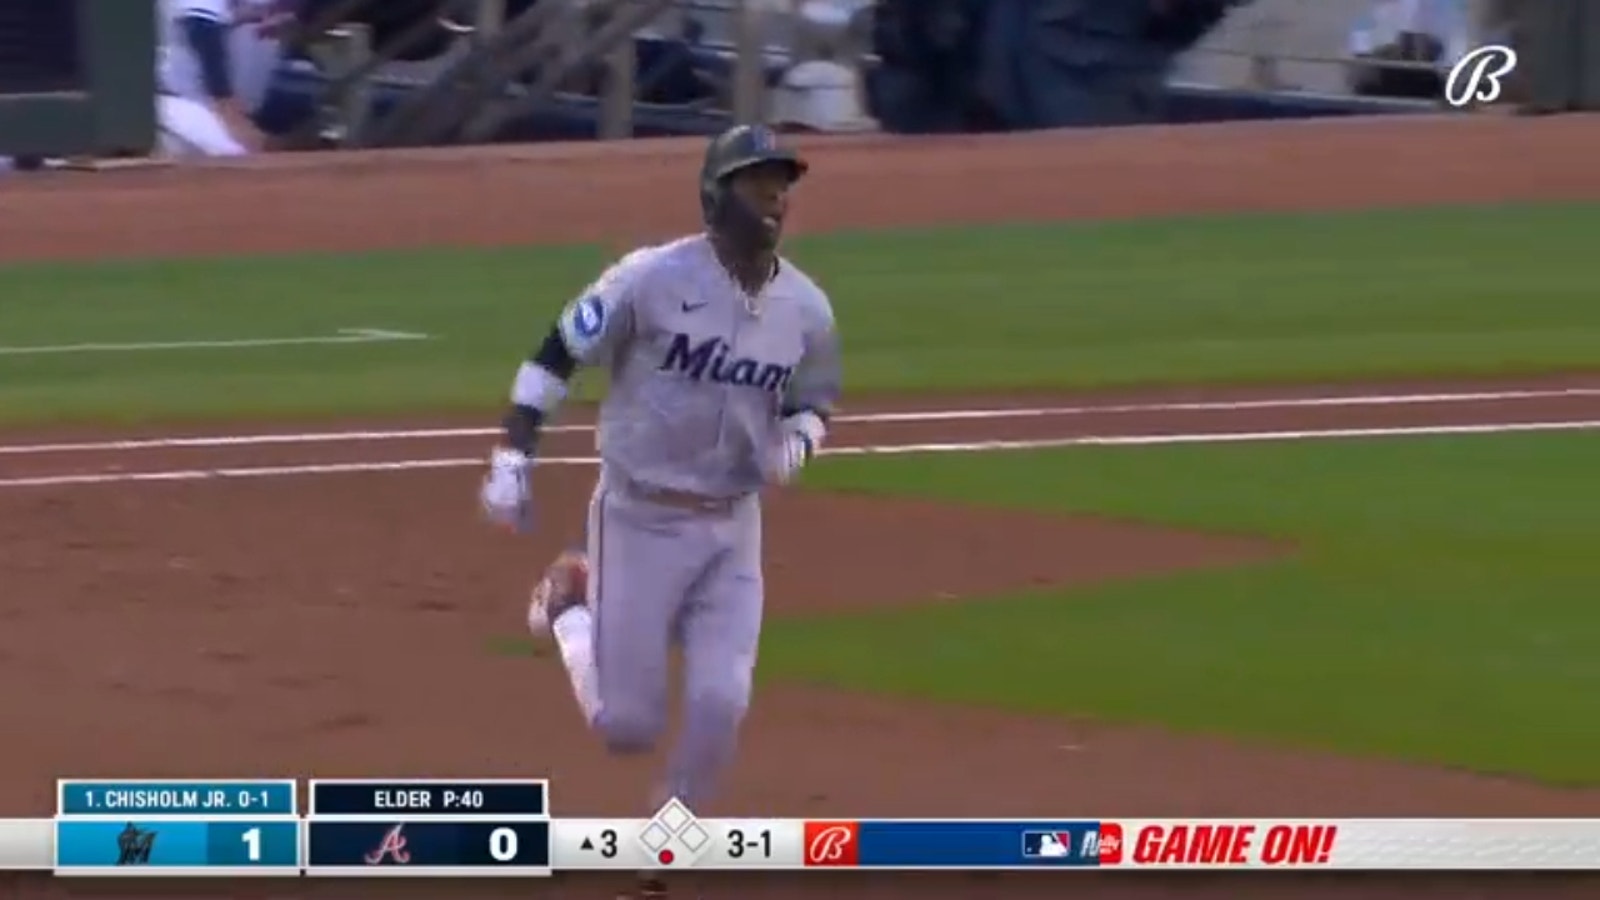 Jazz Chisholm hits a solo home run to extend the Marlins' lead over the Braves